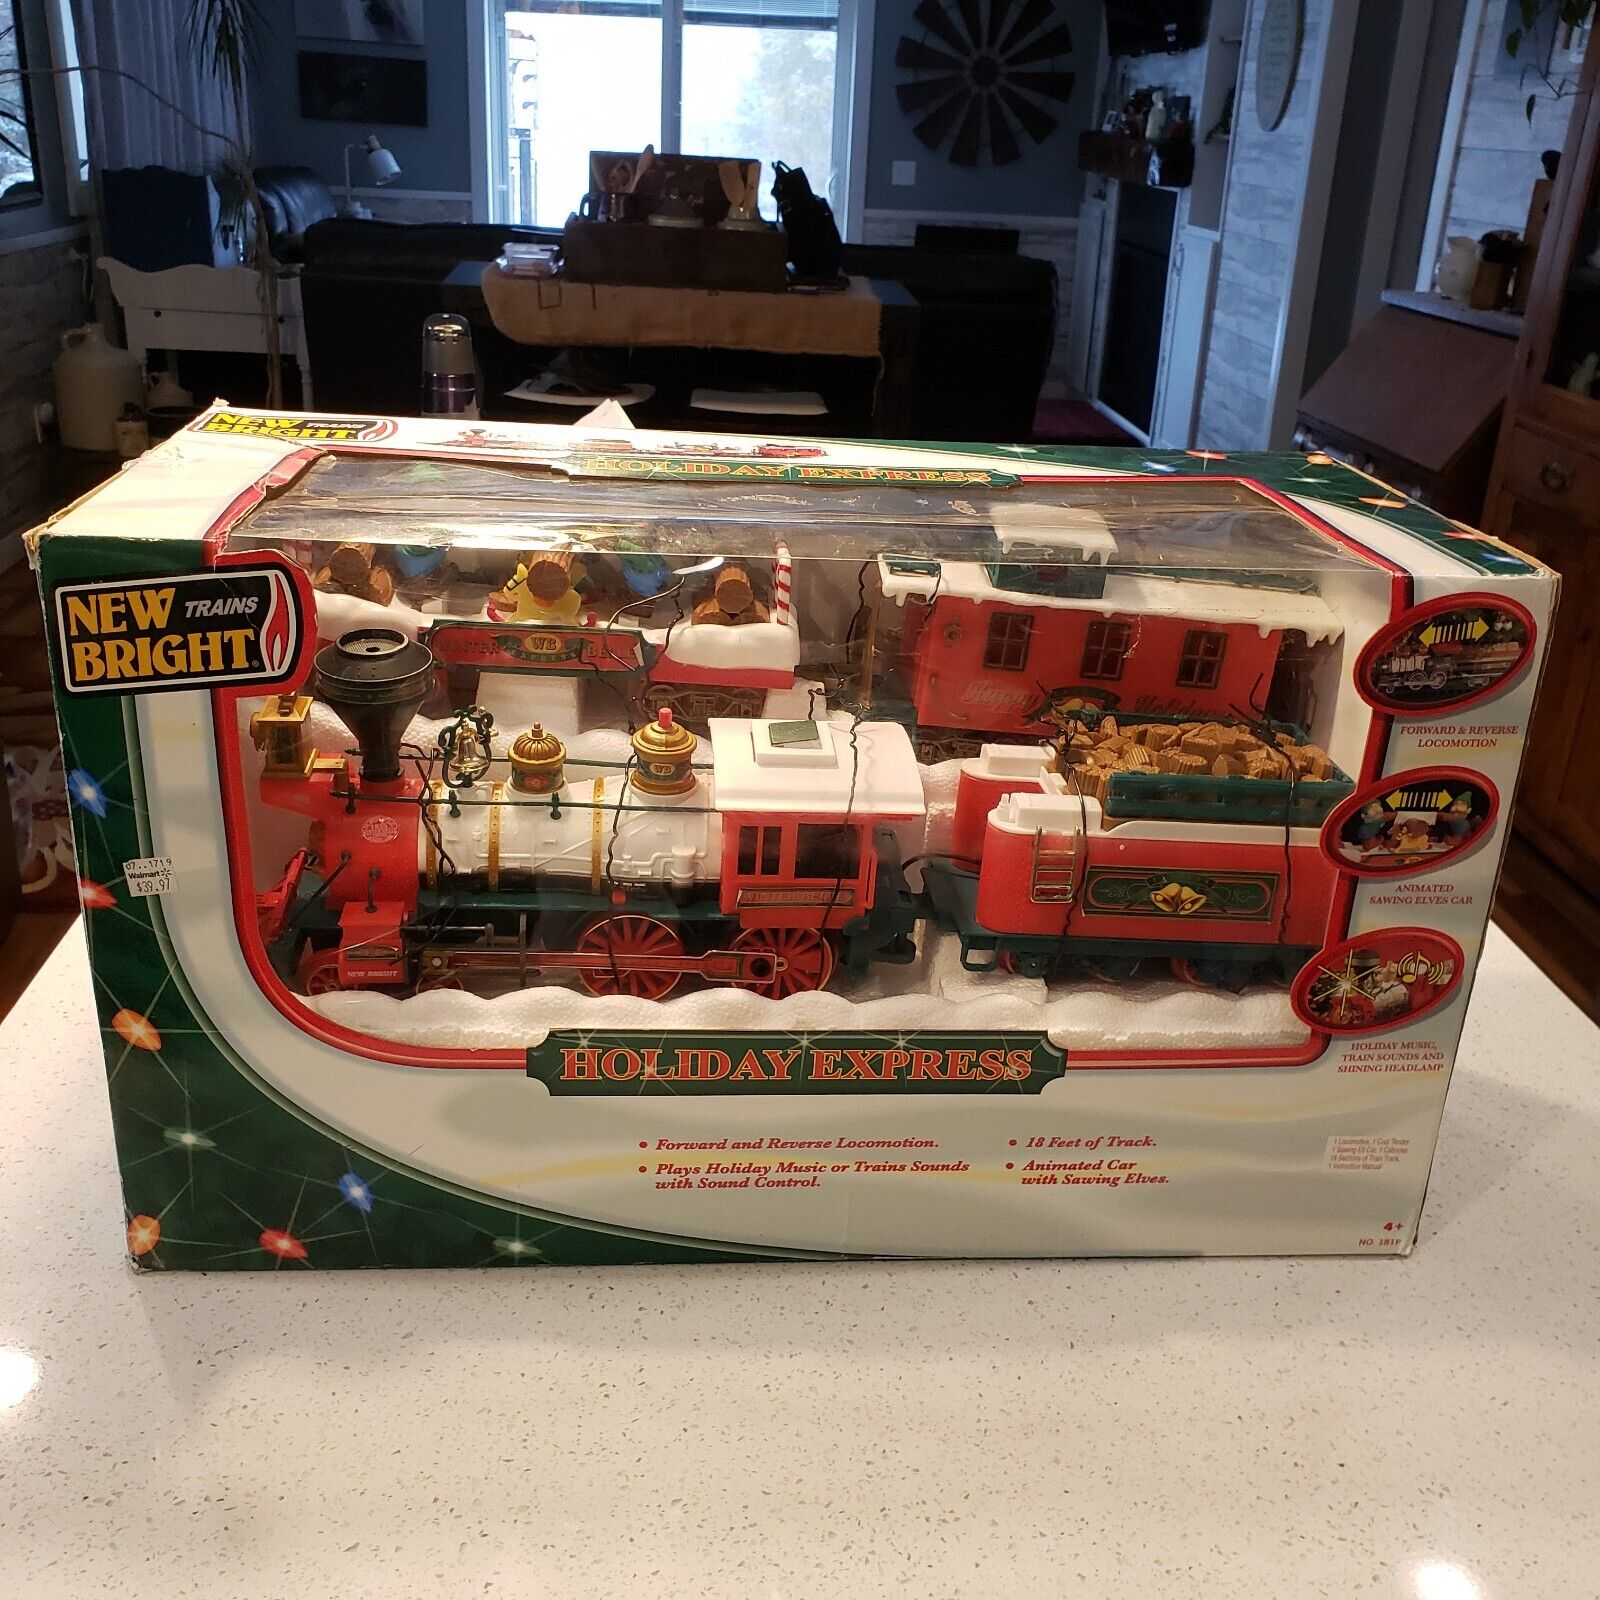 New Bright Trains The Holiday Express Train Set No. 181 Christmas Train Complete